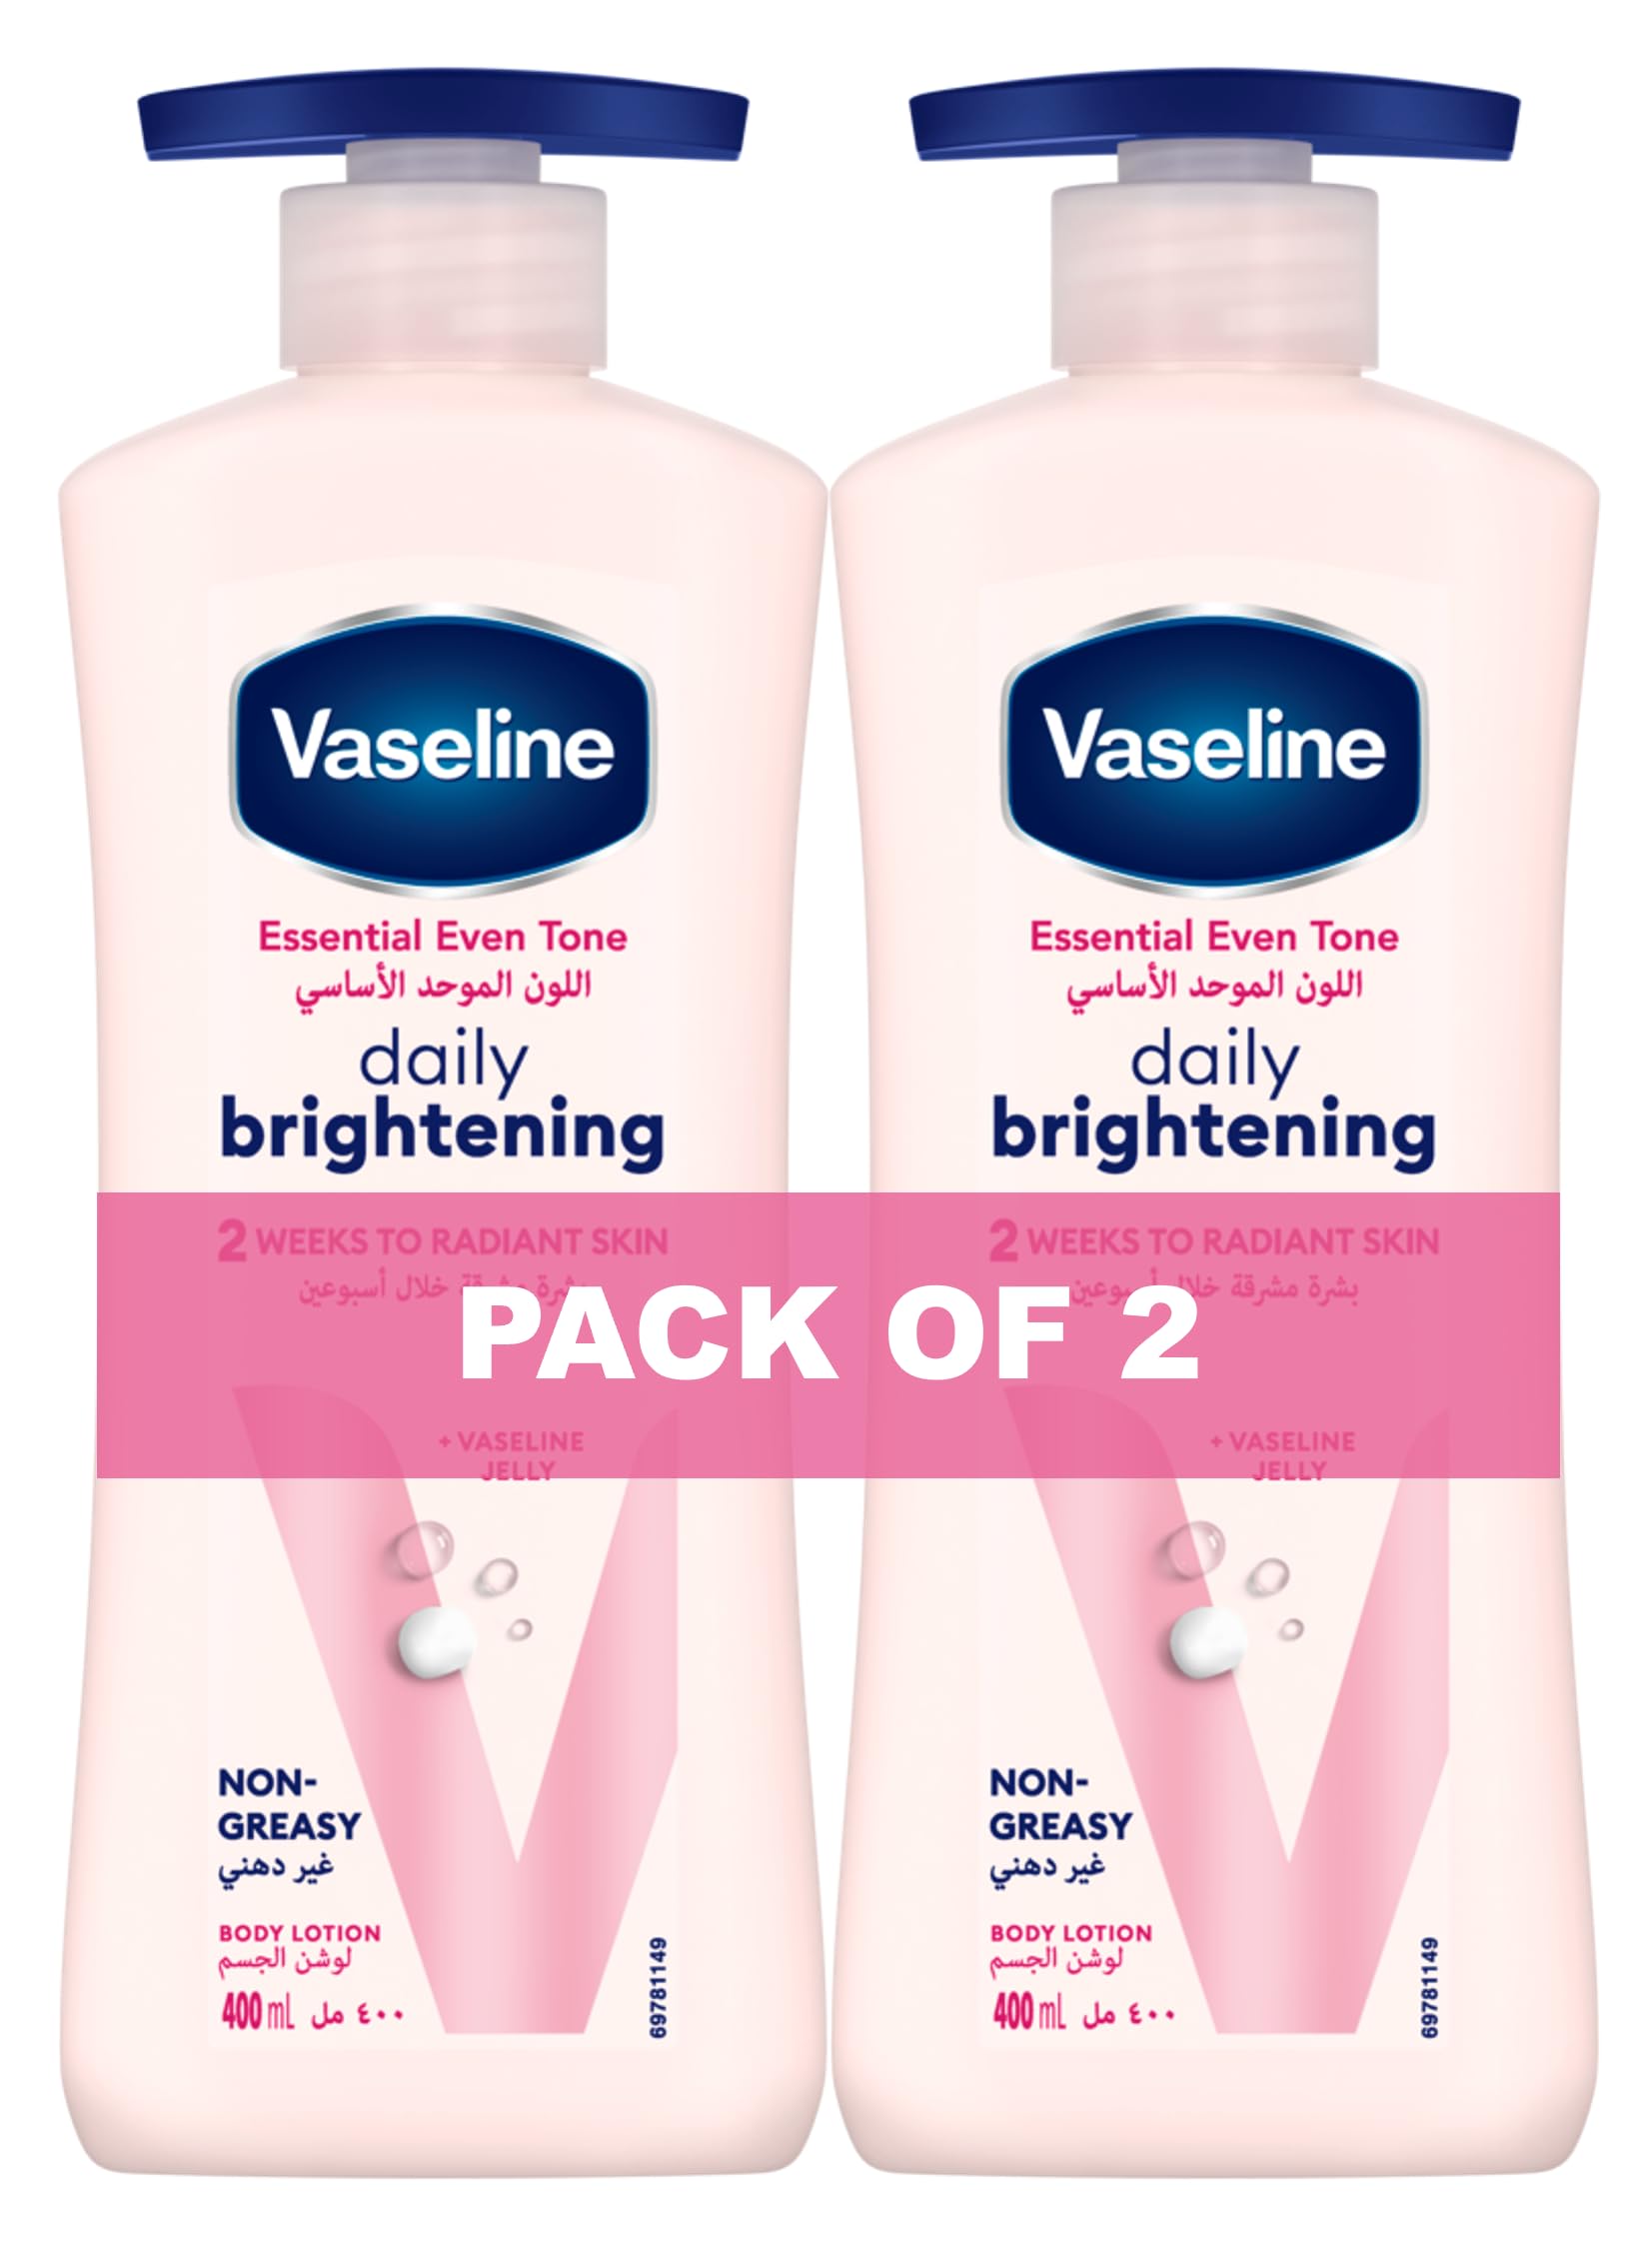 Vaseline Body Lotion EvenTone Daily Brightening, 400ml (Pack of 2)